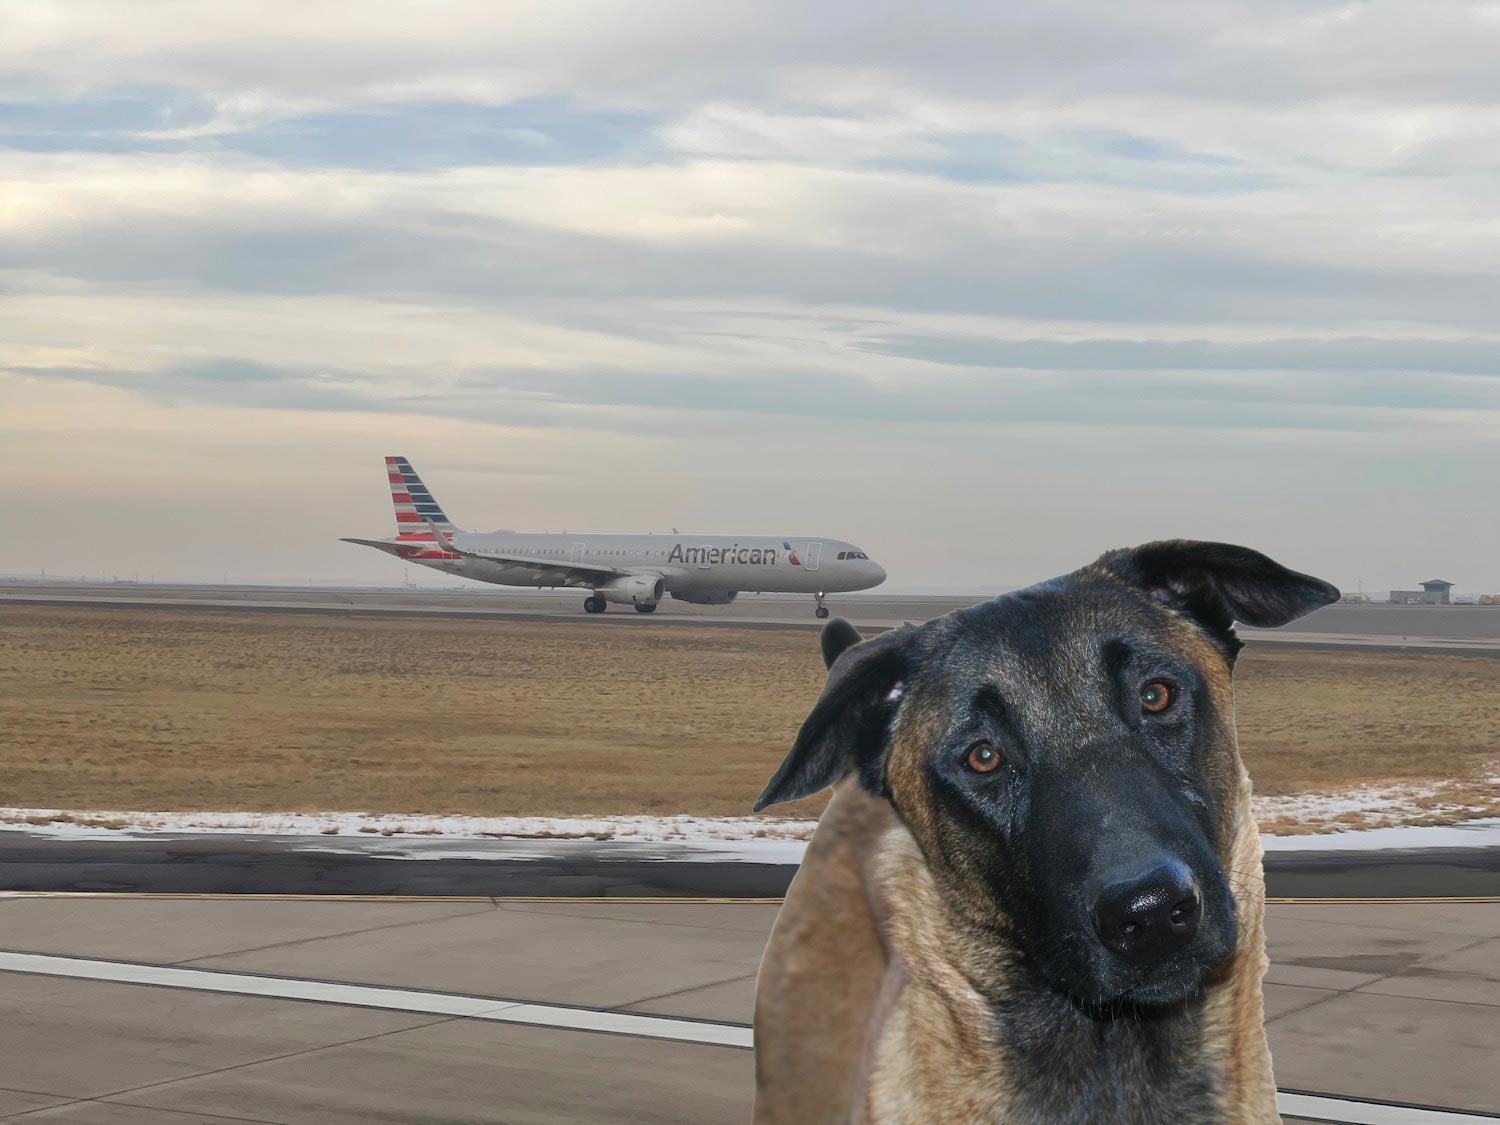 a dog sitting on a runway with an airplane in the background